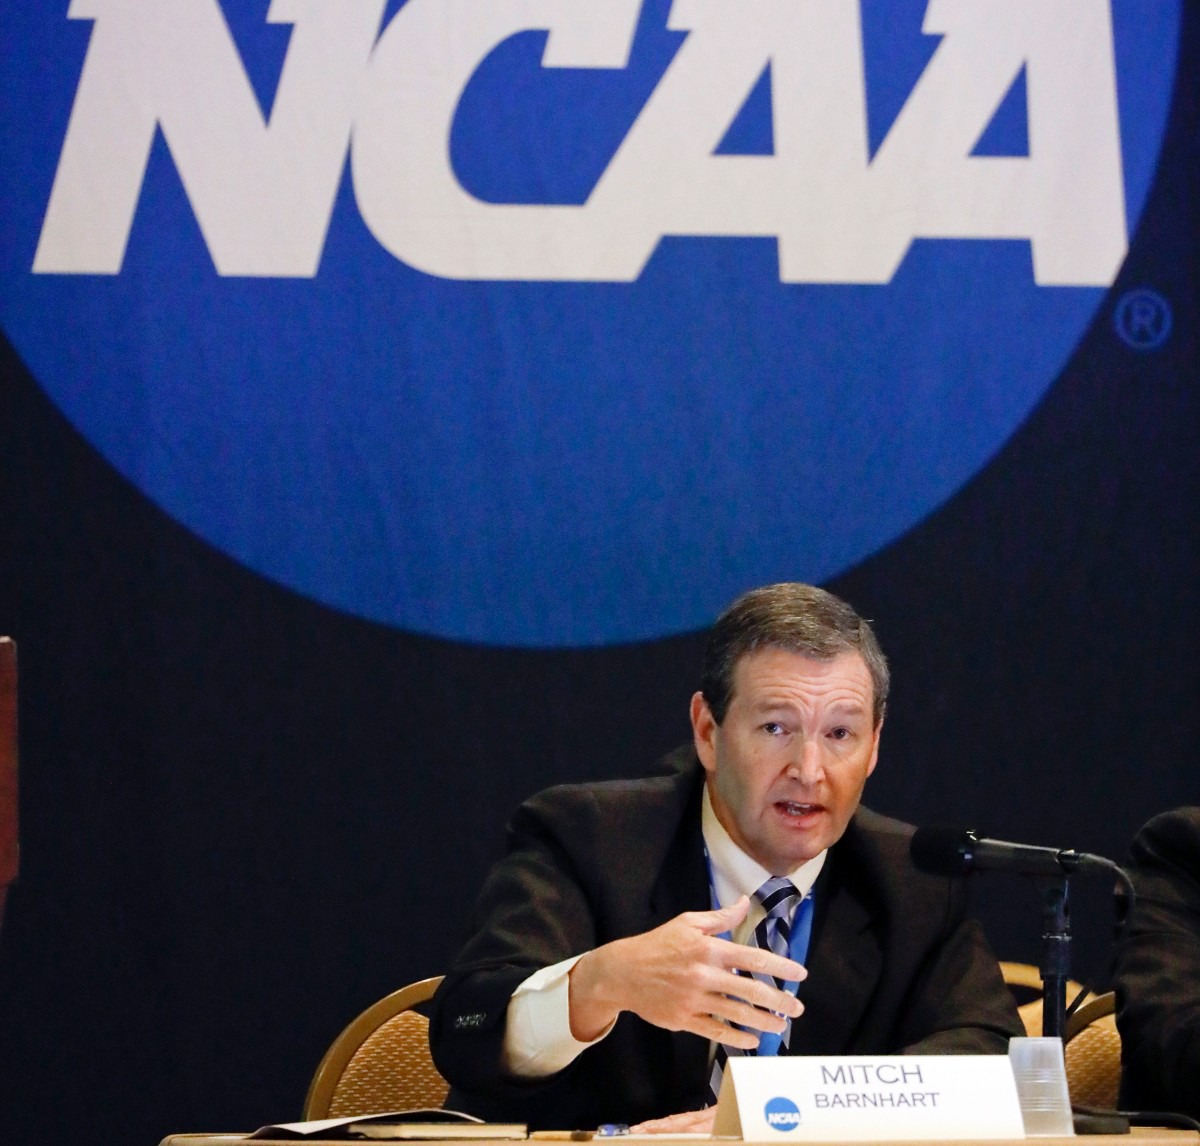 NCAA to allow limited fan attendance at basketball tournaments